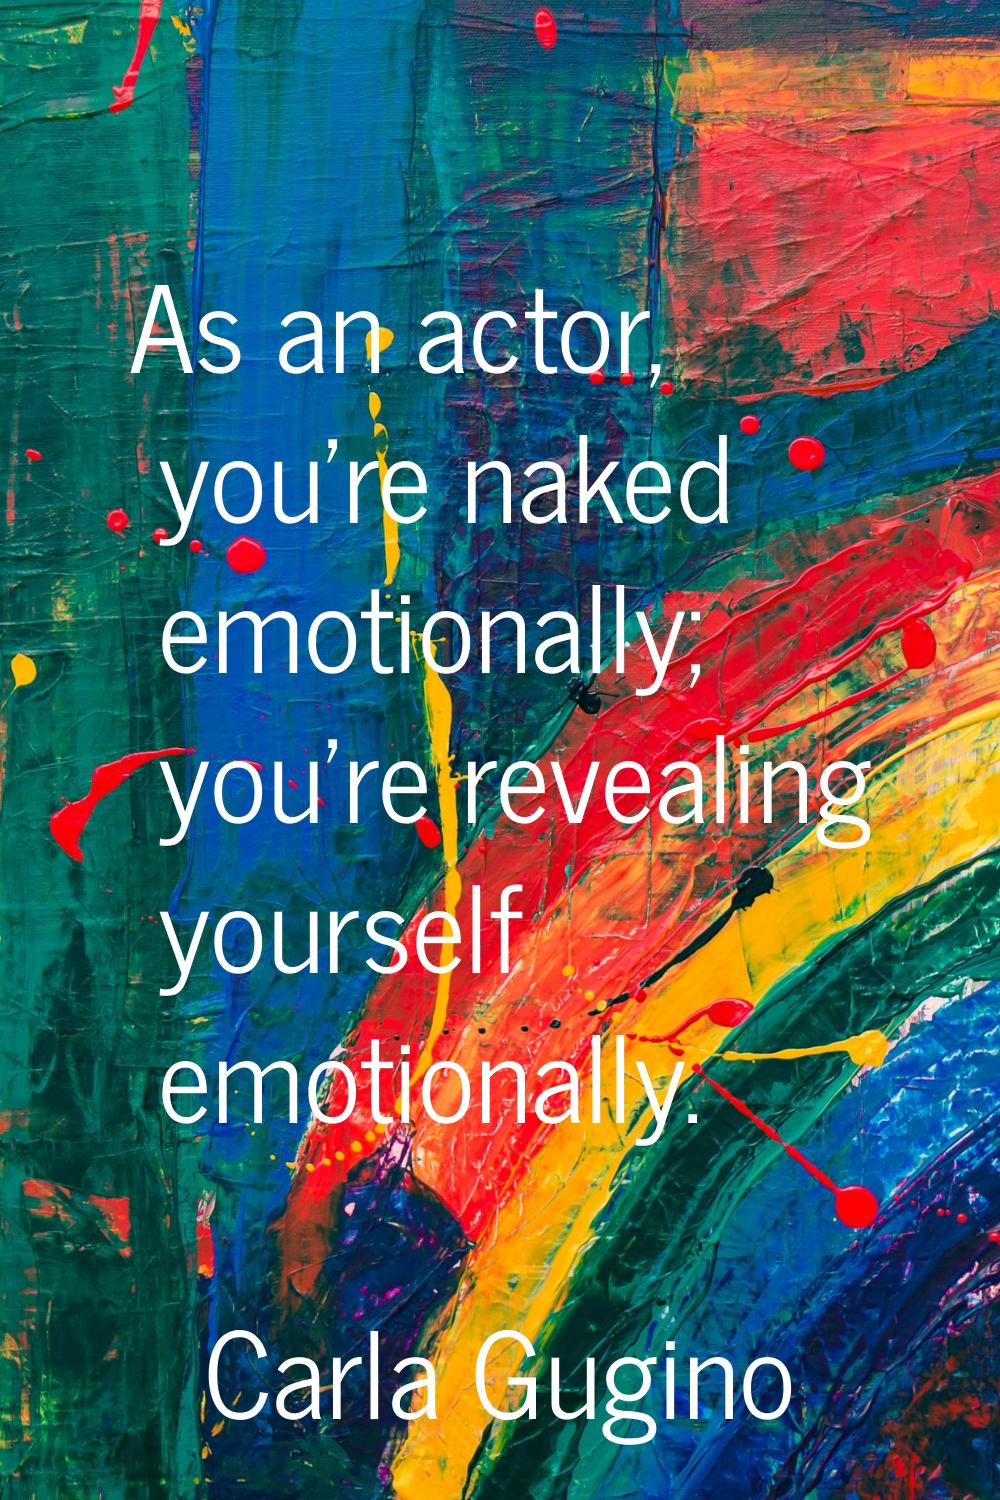 As an actor, you're naked emotionally; you're revealing yourself emotionally.